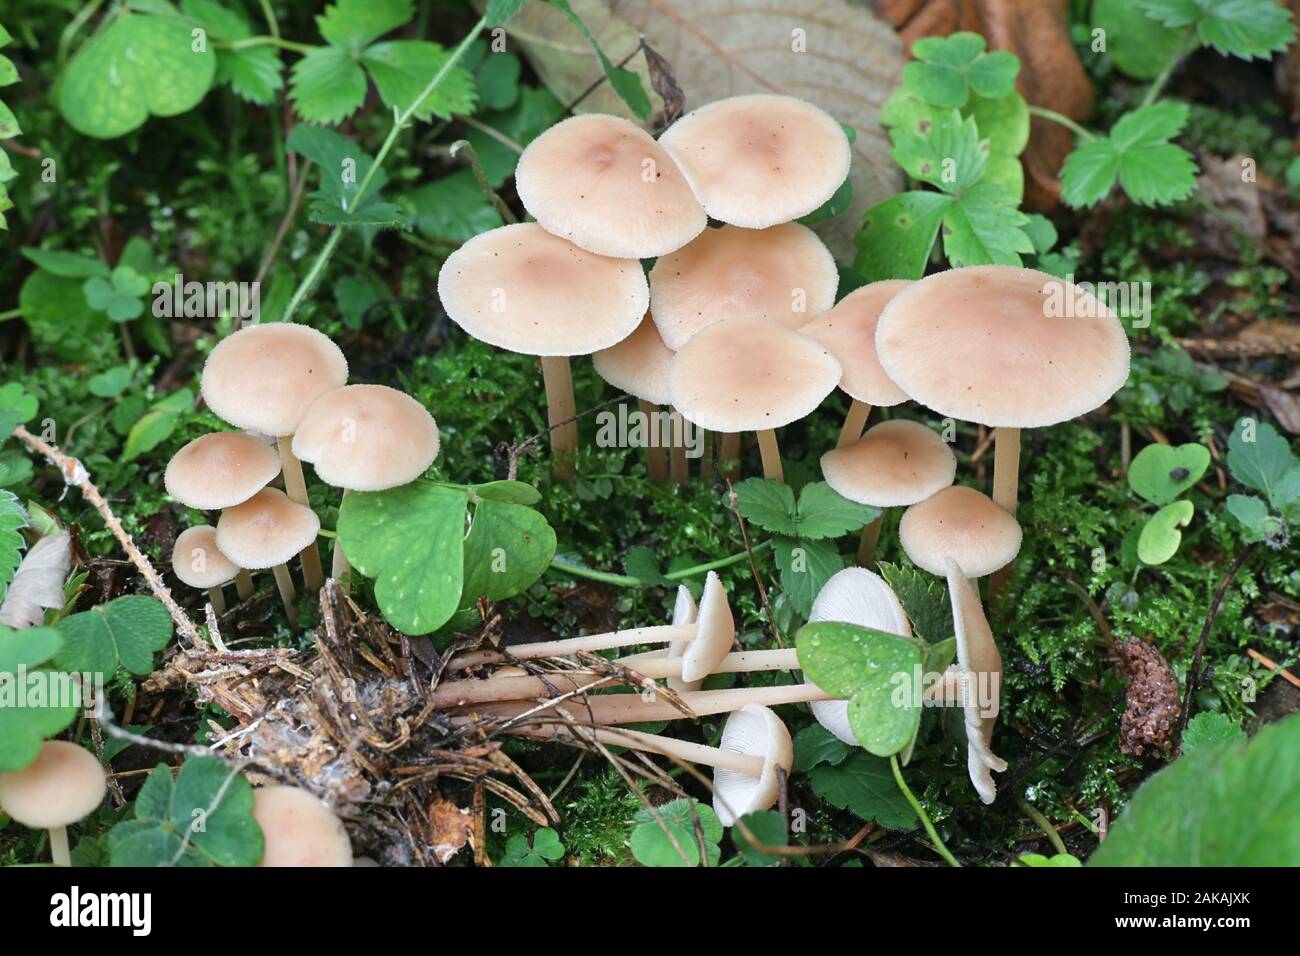 Gymnopus acervatus, known as Conifer Toughshank, mushrooms from Finland Stock Photo